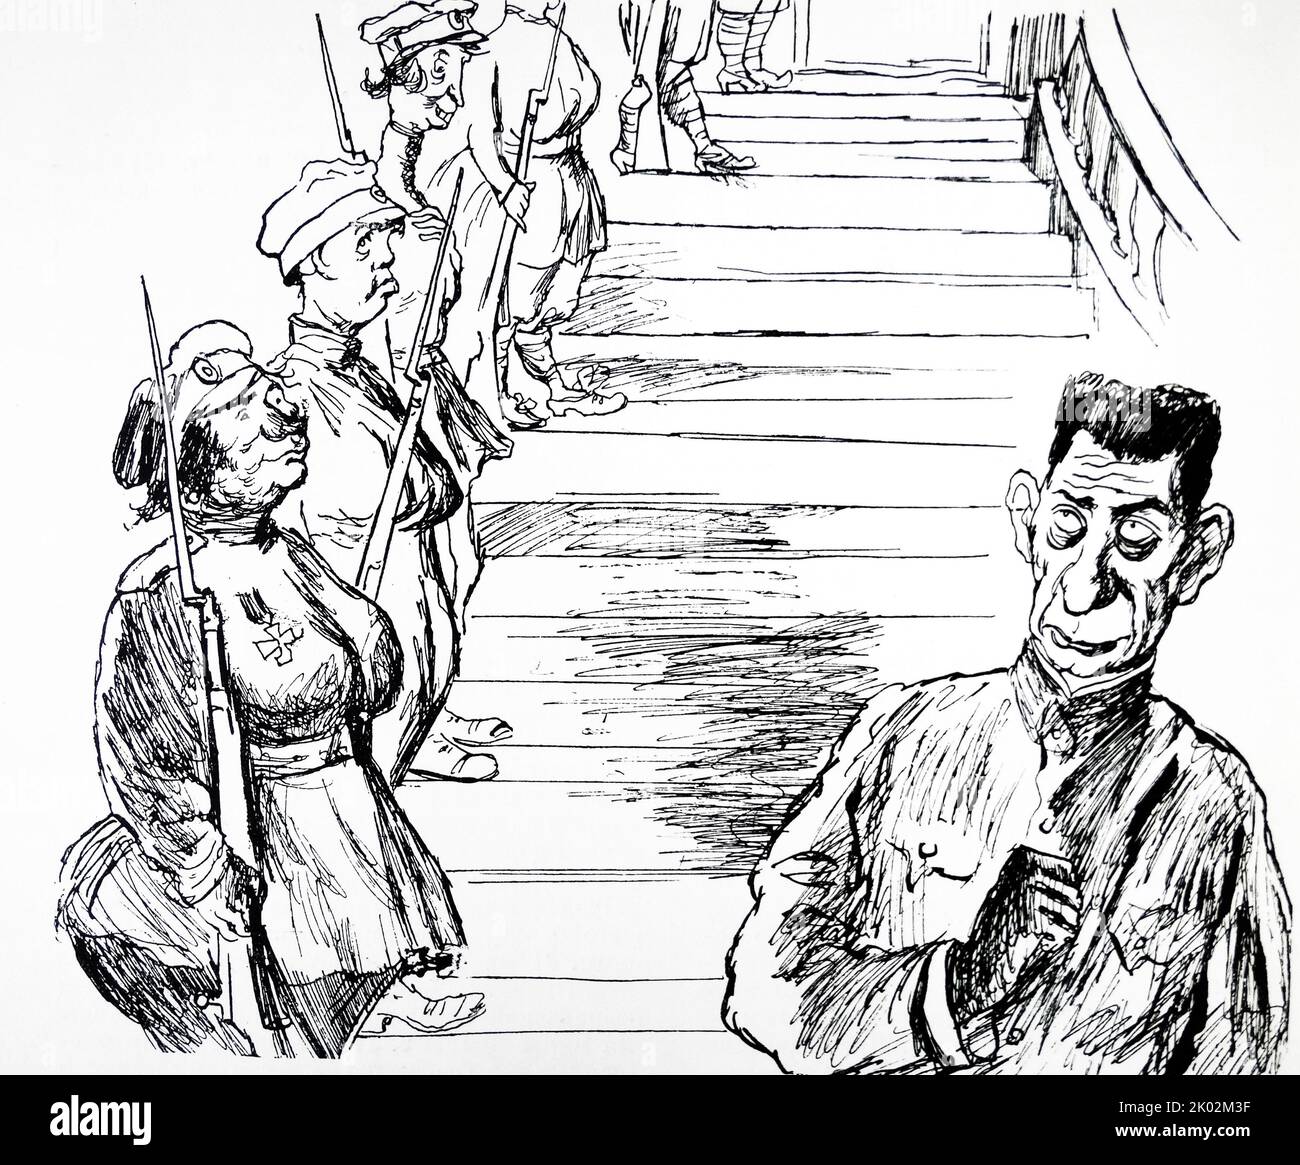 Kerensky conducting a review of the female fighting forces of the counter-revolution. Caricature by Kukryniksy. Stock Photo